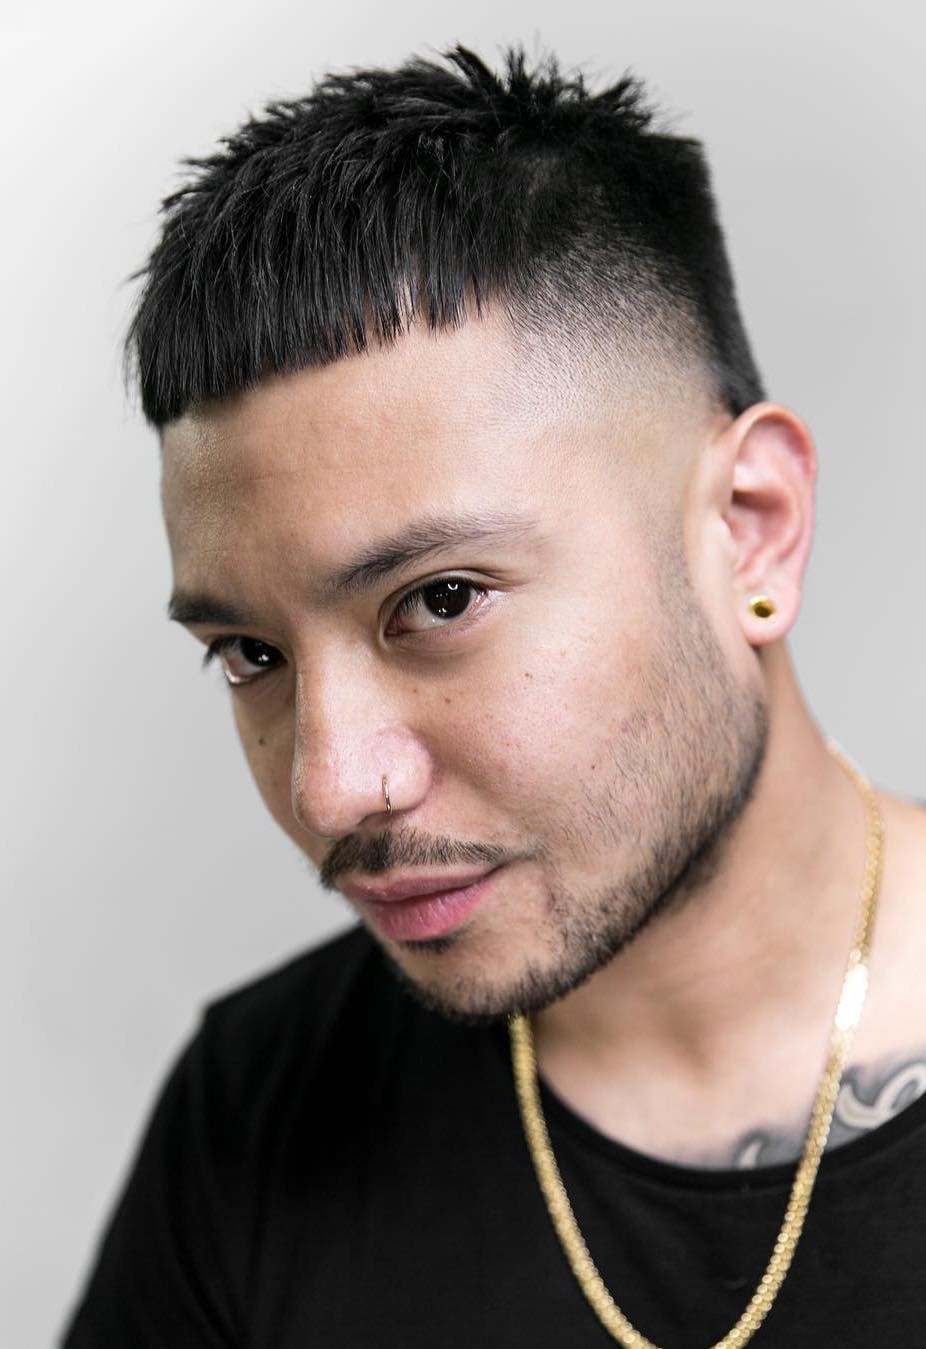 Top 30 Trendy Asian Men Hairstyles 2019 intended for The best Young Asian Boy Hairstyles